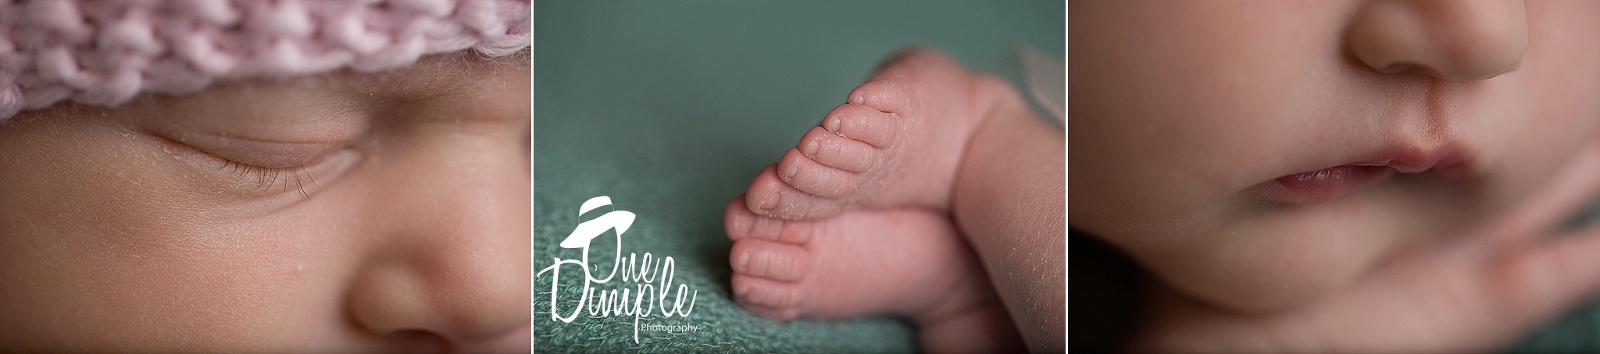 newborn lips, lashes, and toes